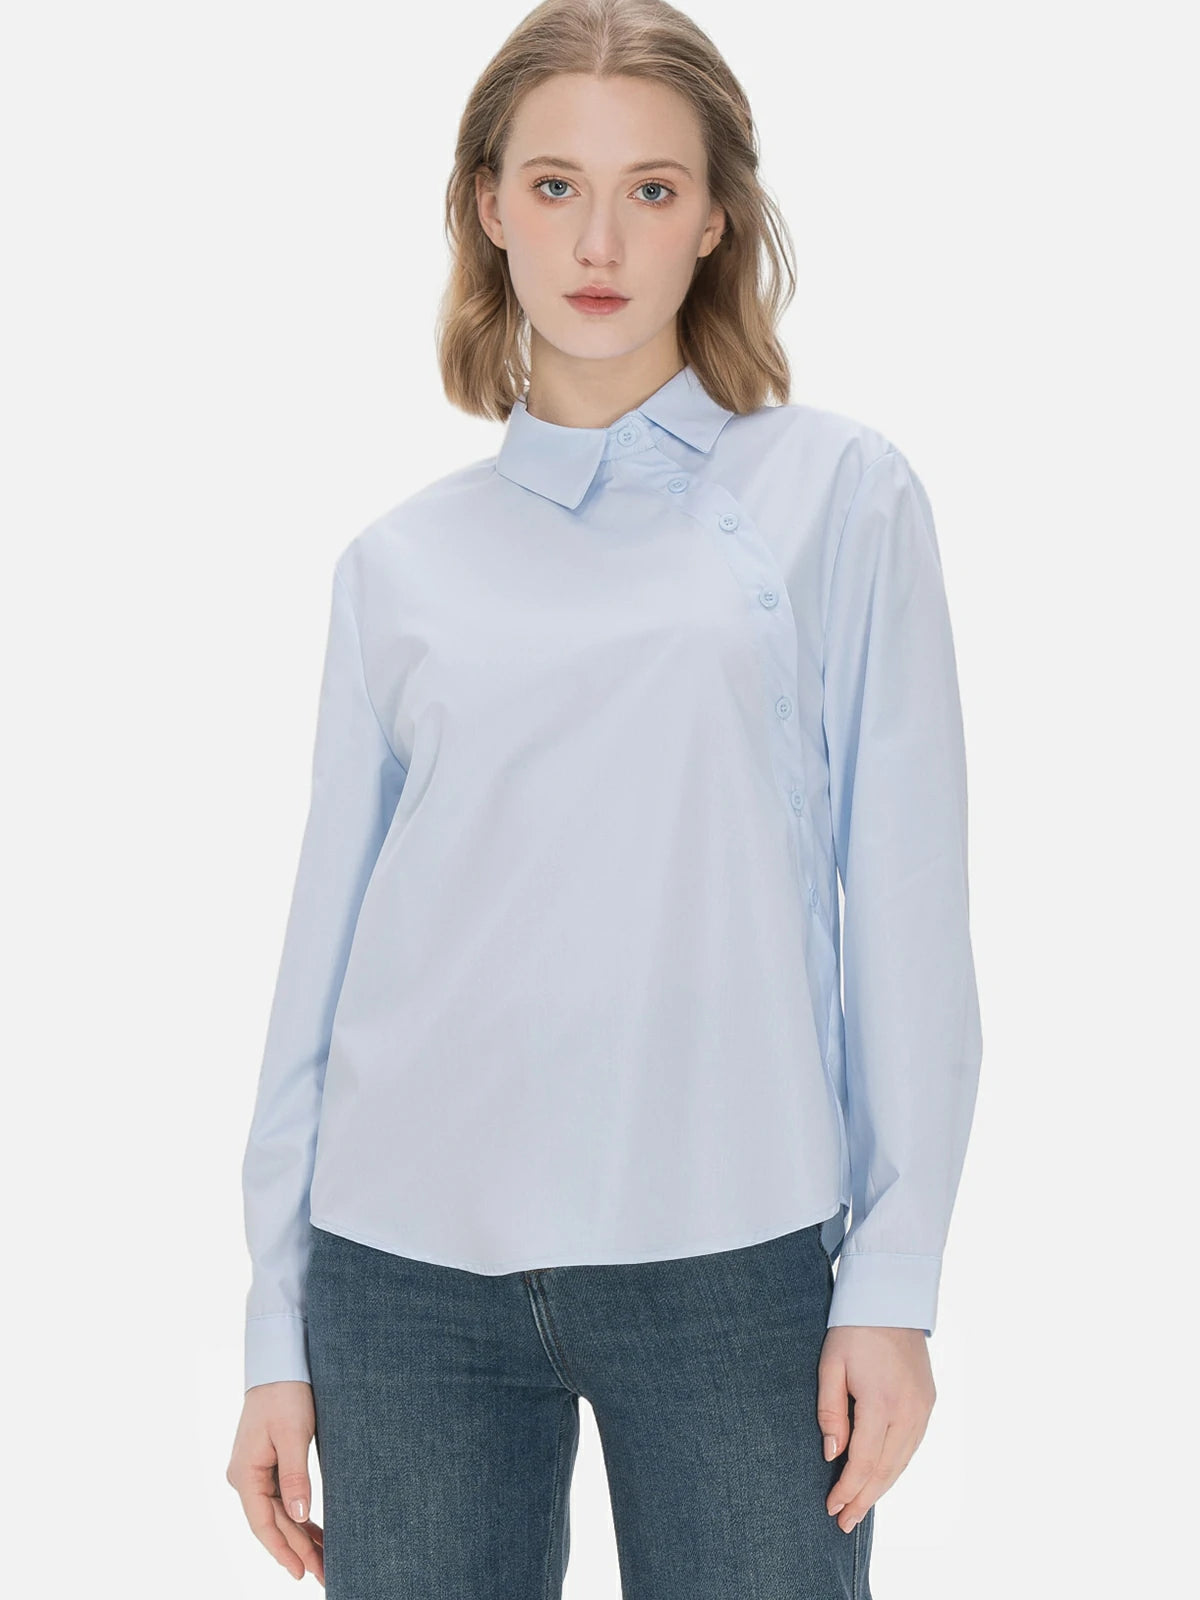 Stylish ladies&#39; collared shirt with a unique diagonal button design and classic blue color, perfect for a fashionable and elegant look on various occasions.